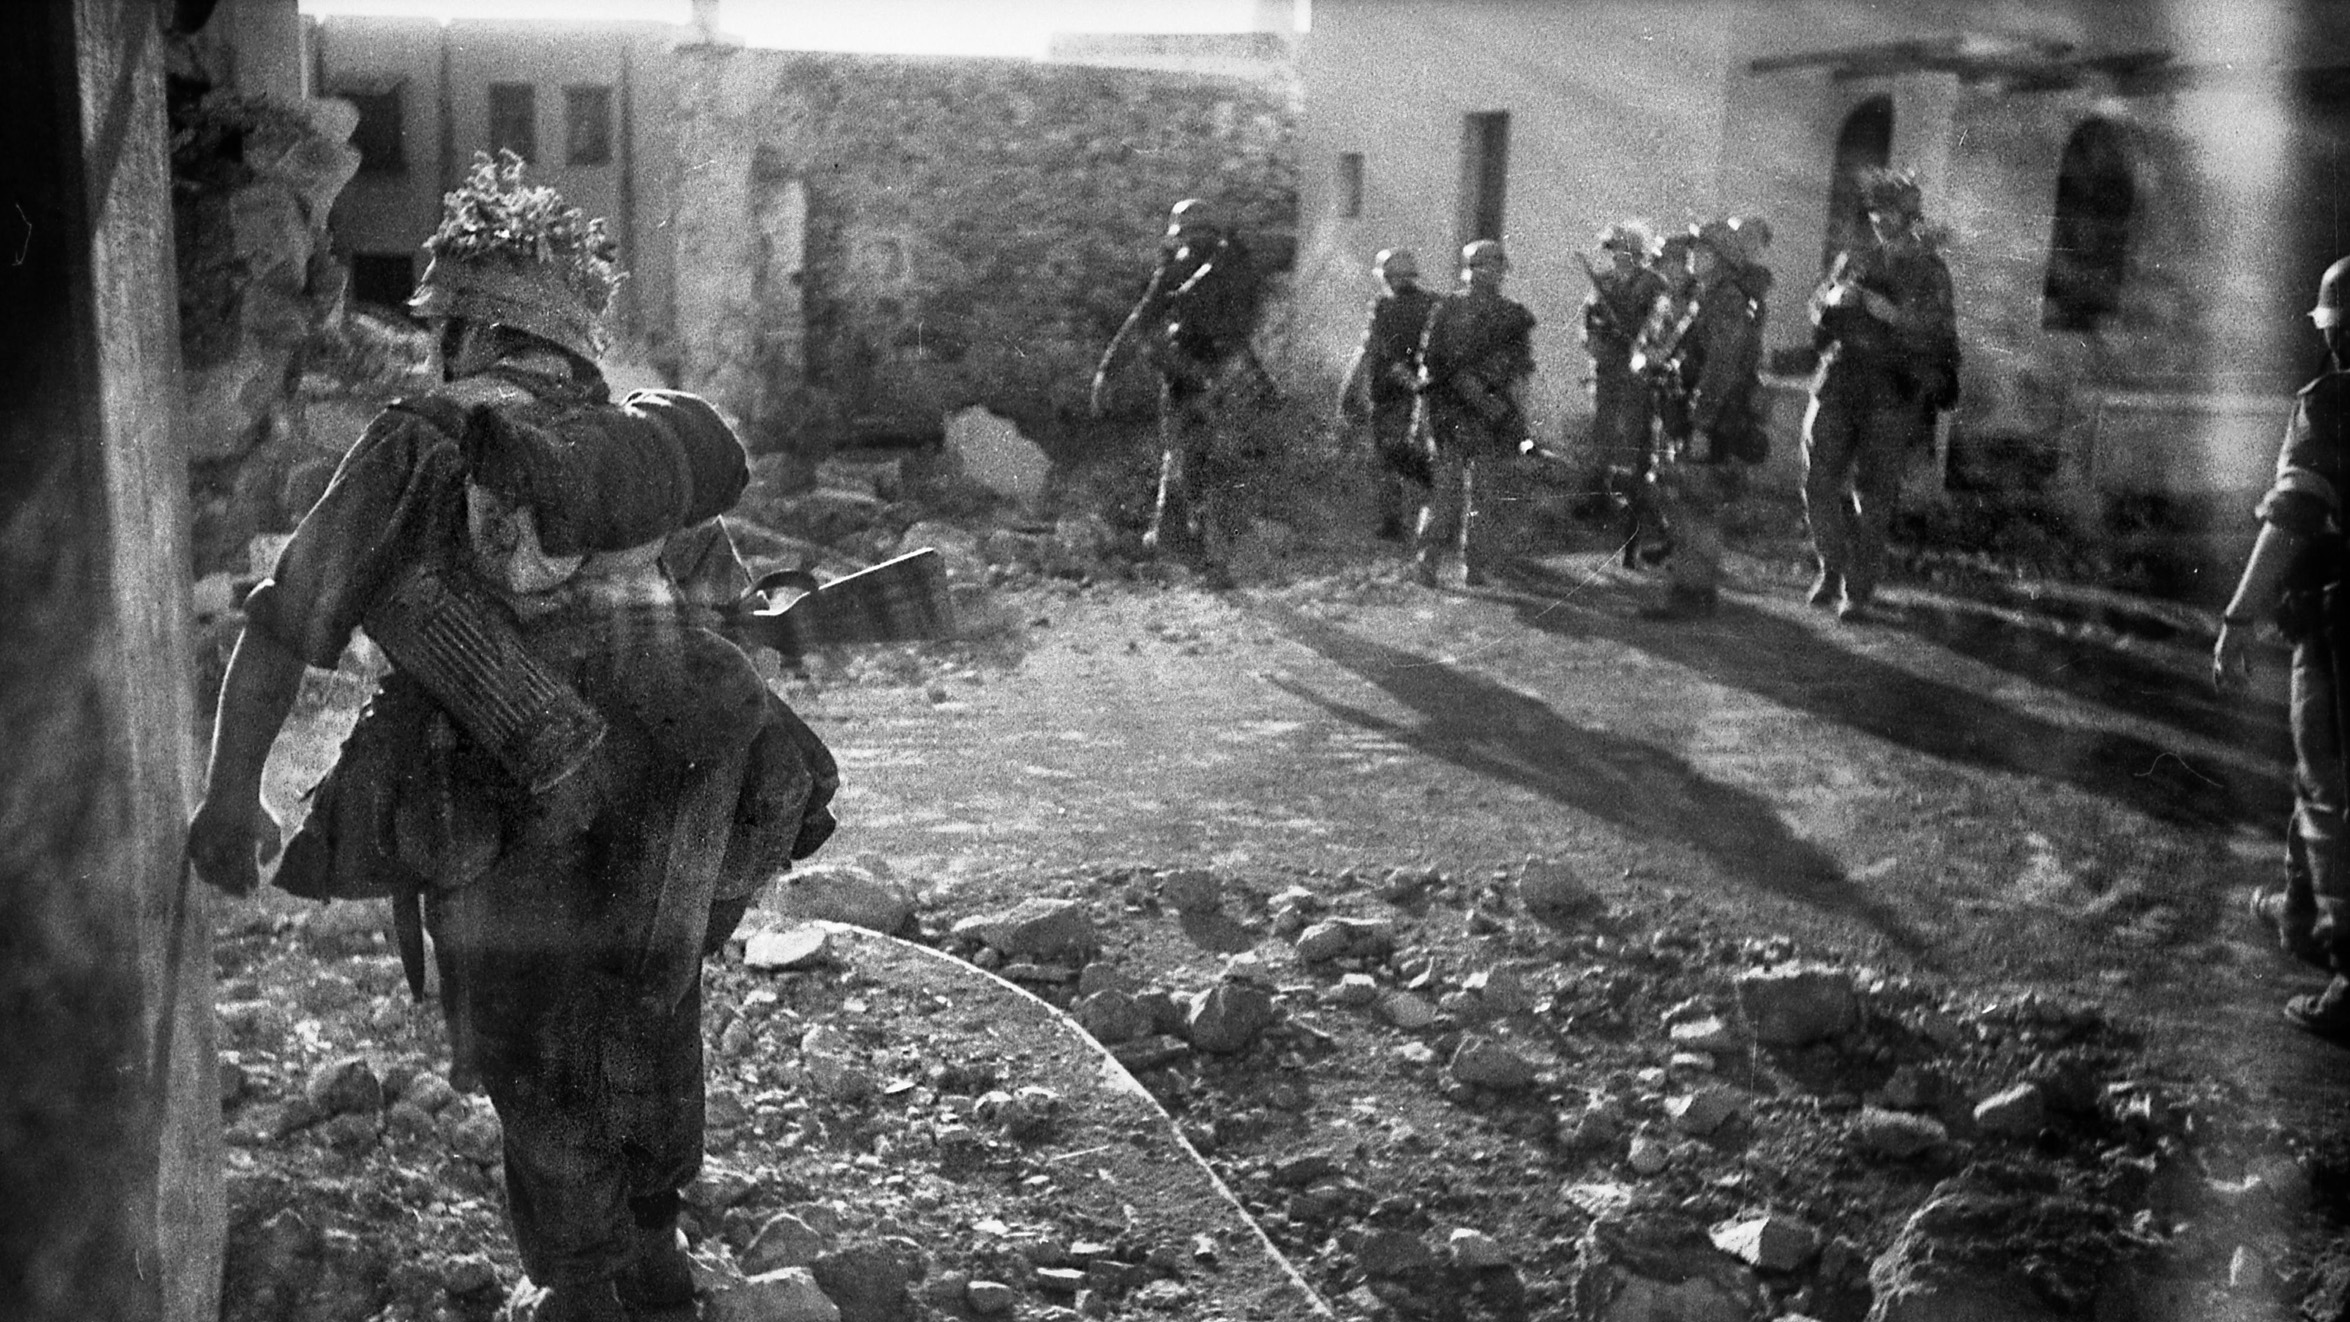 German riflemen enter the city of Kos. With no reinforcements scheduled to arrive, the British surrendered on the second day of the German invasion.